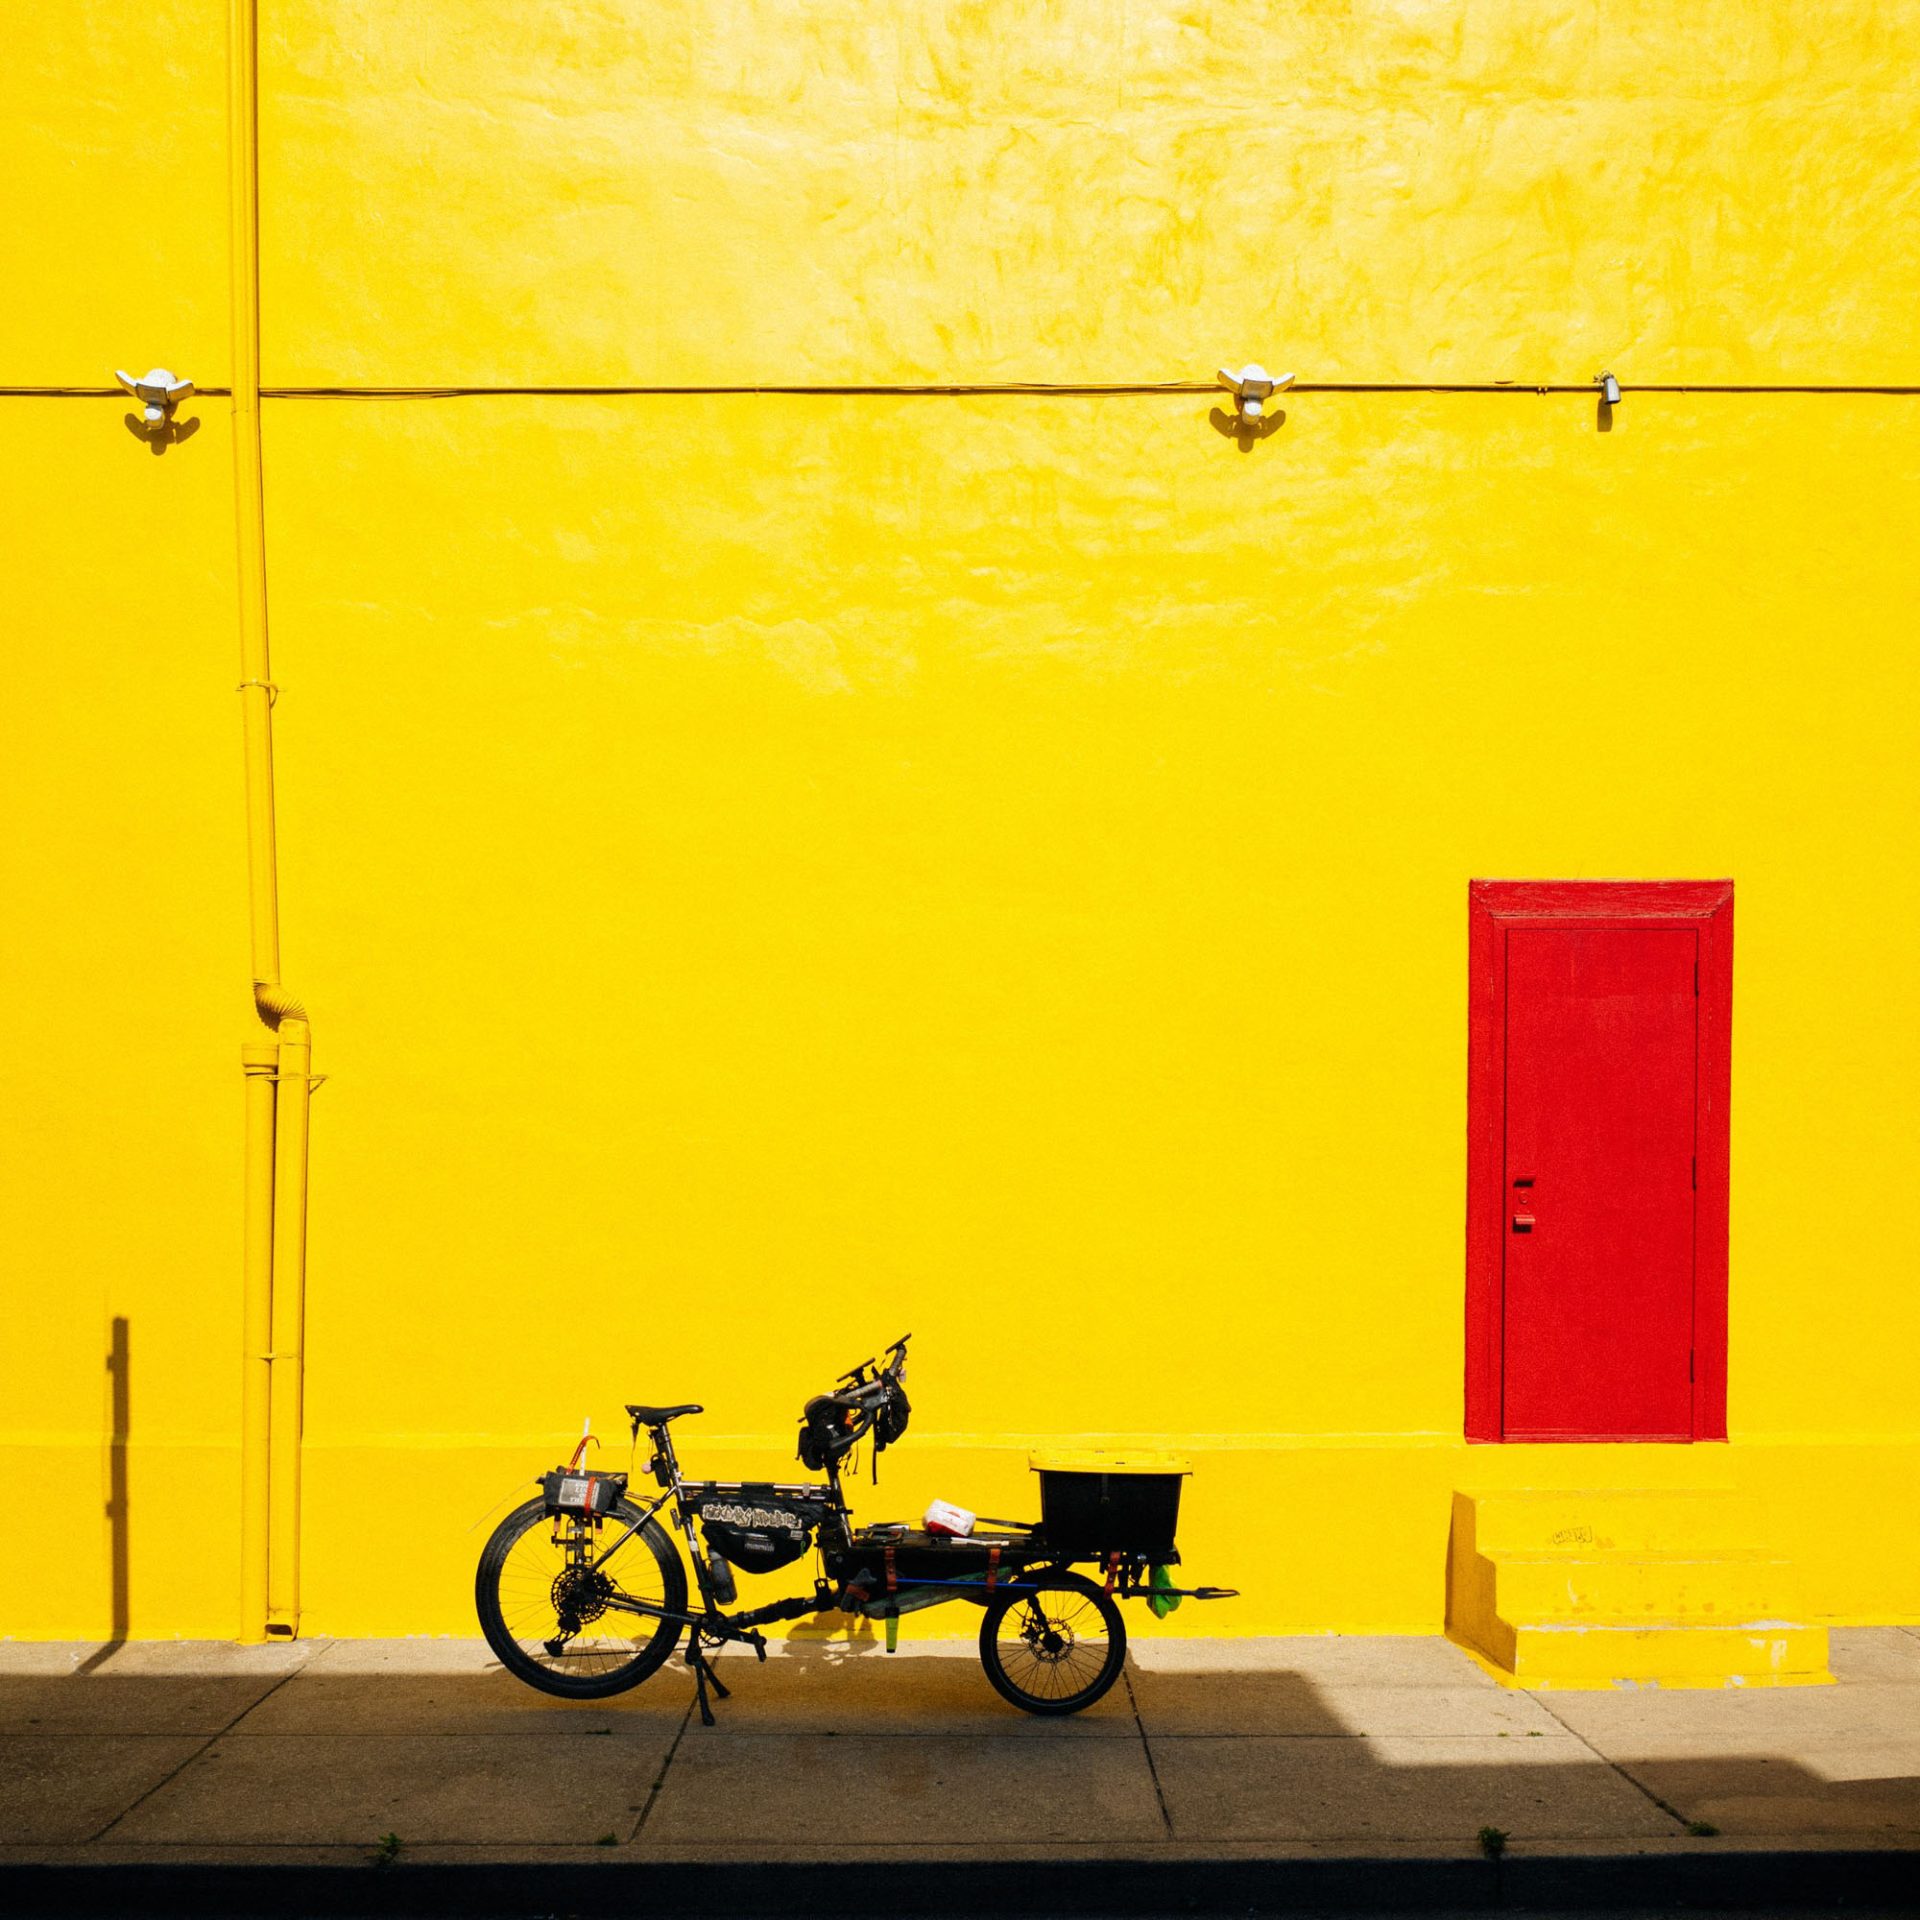 Binggeser's cargo bike in front of a brightly lit yellow building with a brilliant red door. It has a very abstract-art feel.